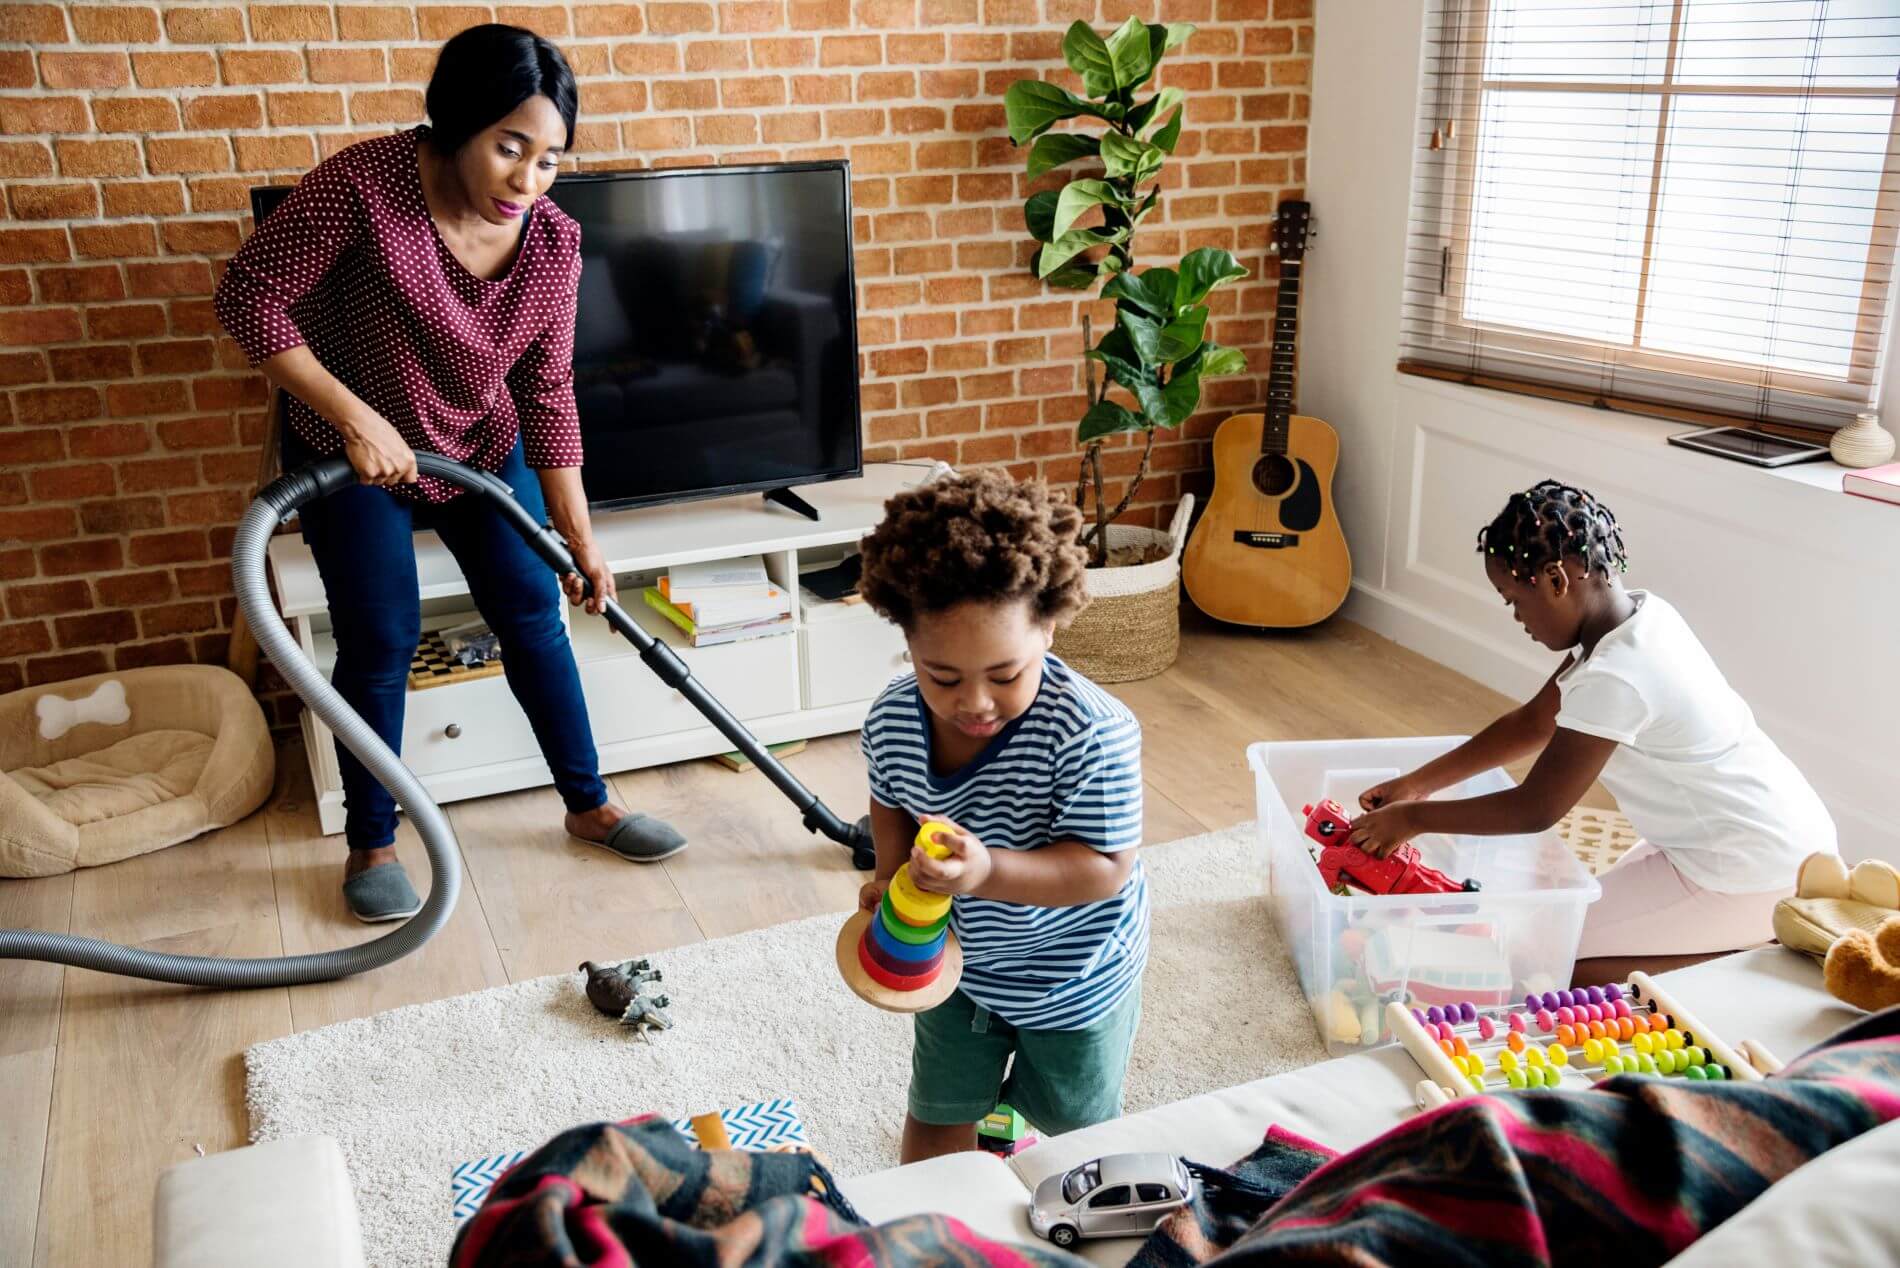 Family working together to clean a living room. The woman uses a vacuum, while the kids clean up toys.